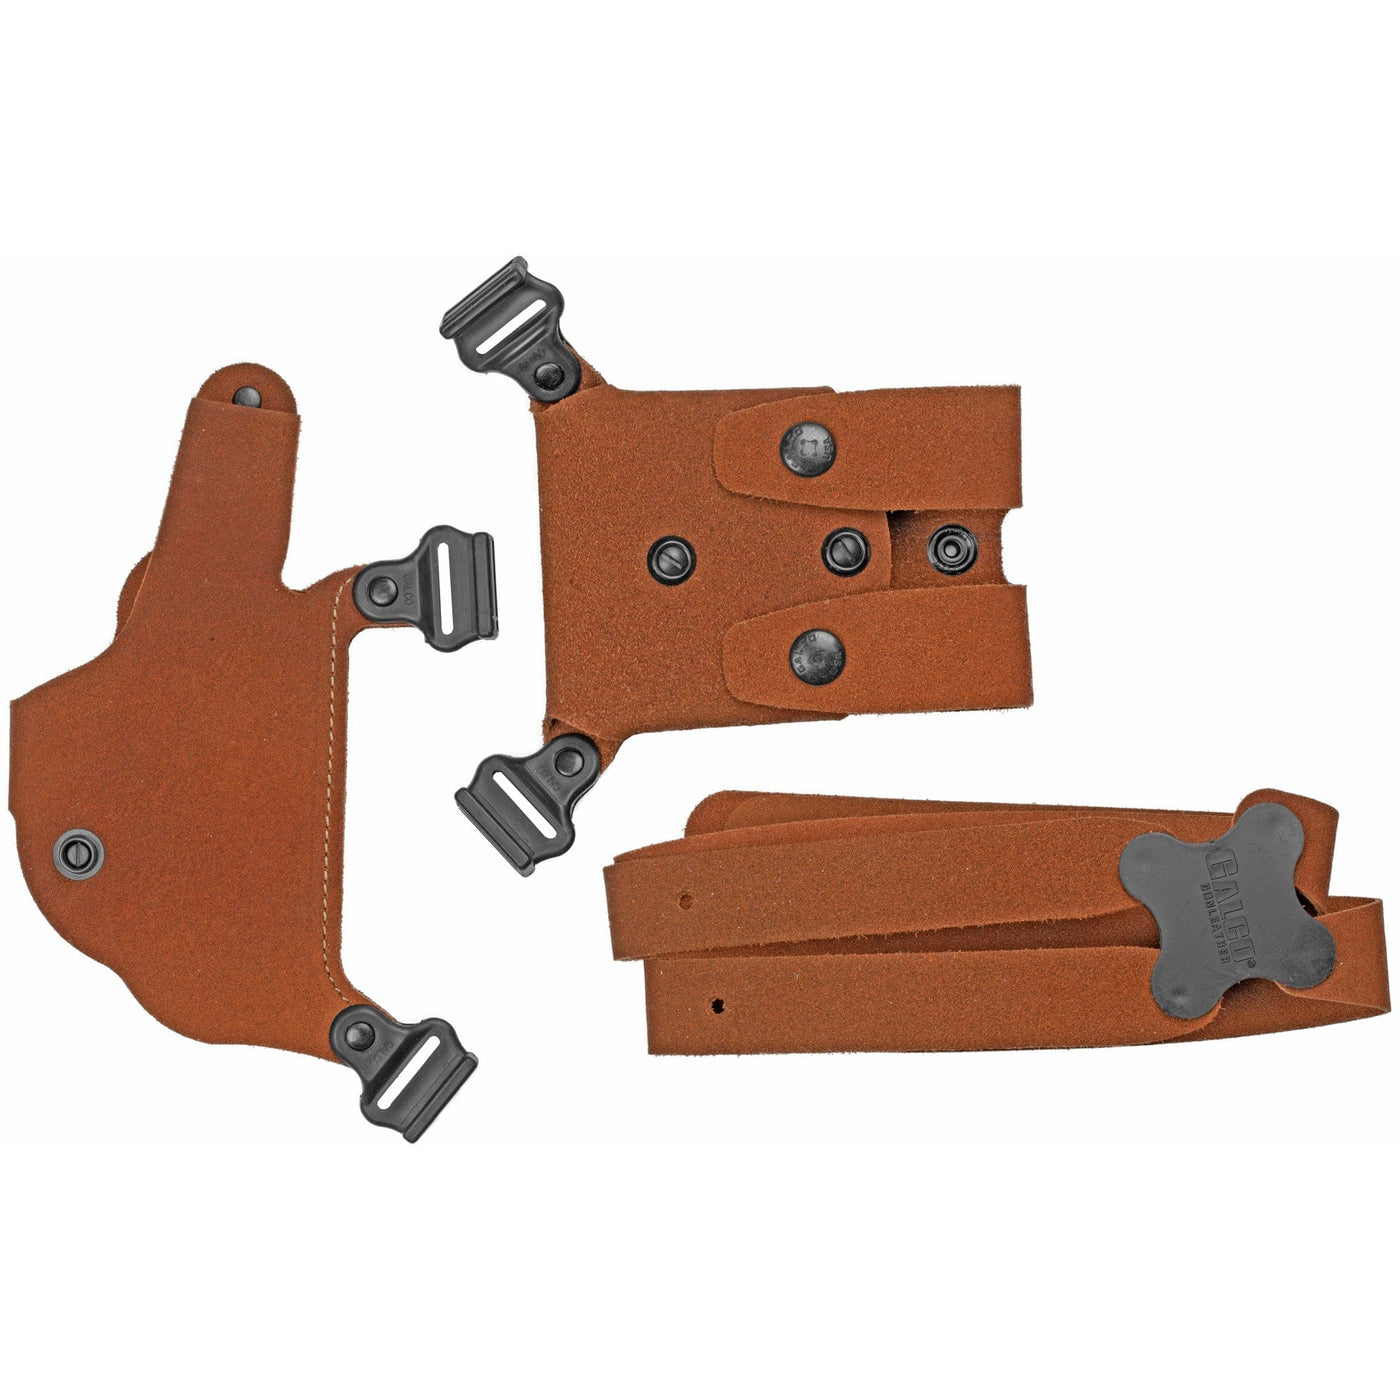 Galco Galco Classic Lite 2.0 Sprg Xds Rh Holsters